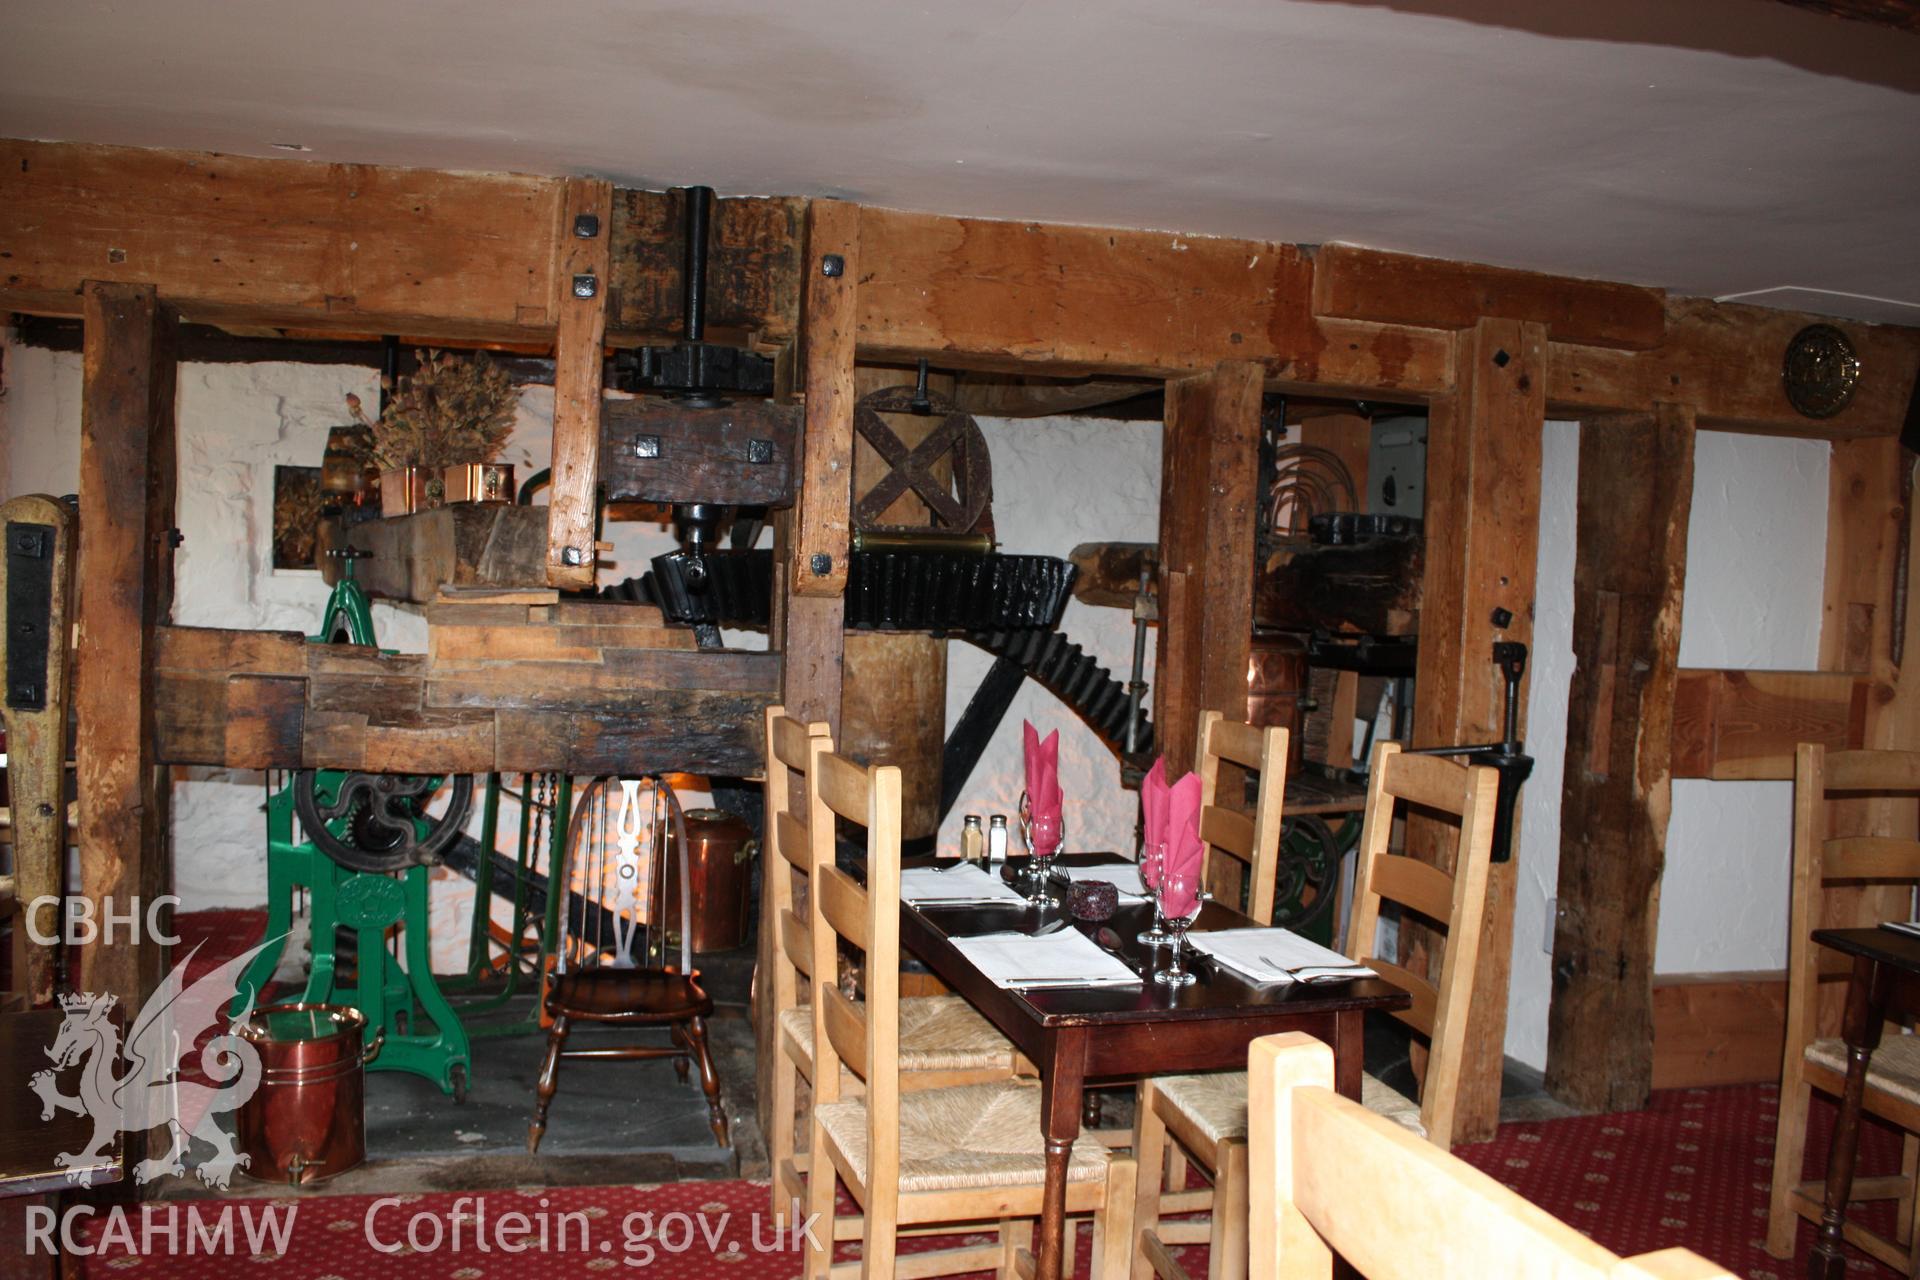 Colour photograph showing interior view of Brookhouse Mill, now a restaurant and bar in Denbigh, Photograpraphed during survey conducted by Geoff Ward circa 2010.